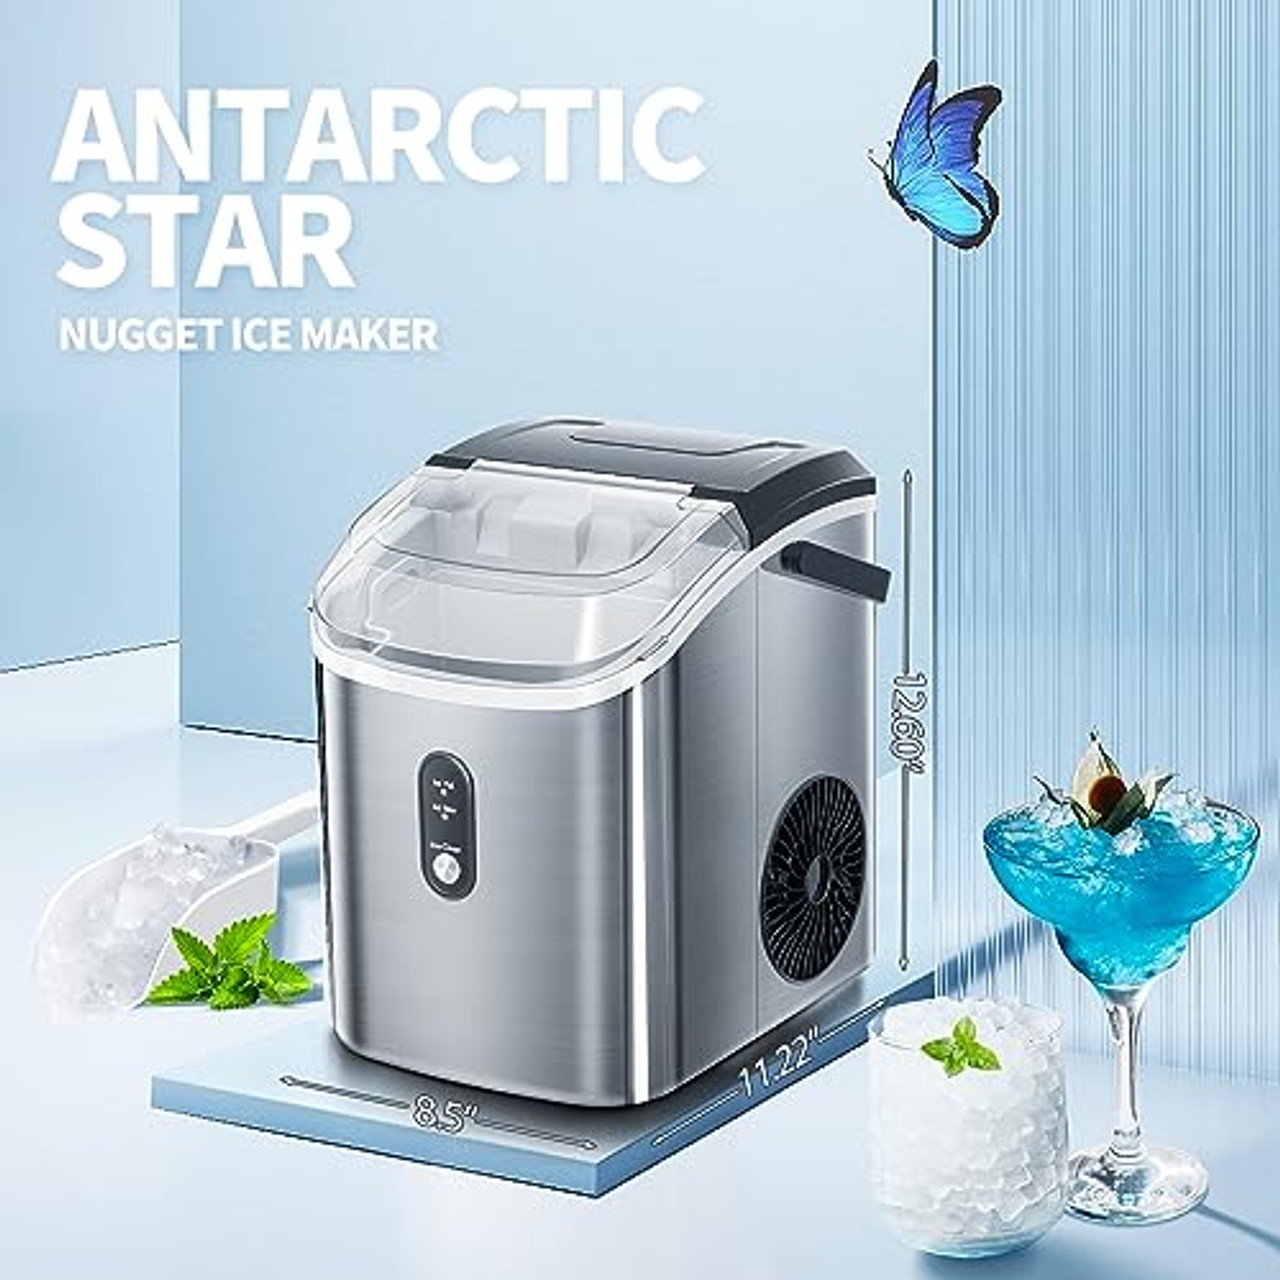 Commercial-grade Nugget Ice Maker